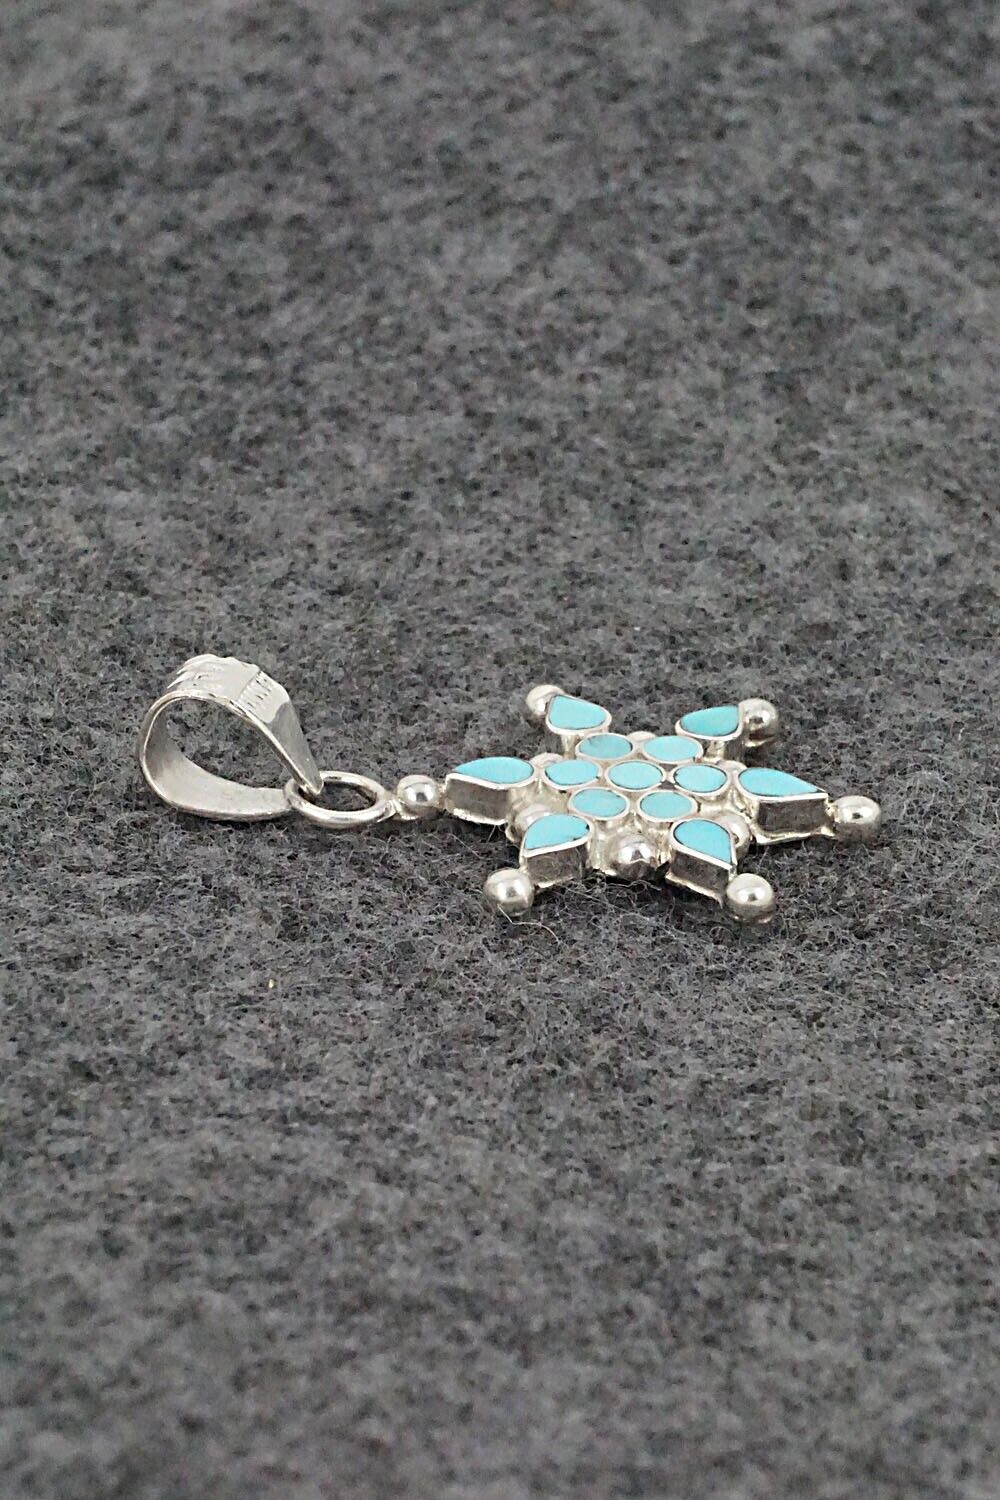 Turquoise & Sterling Silver Pendant - Michelle Peina